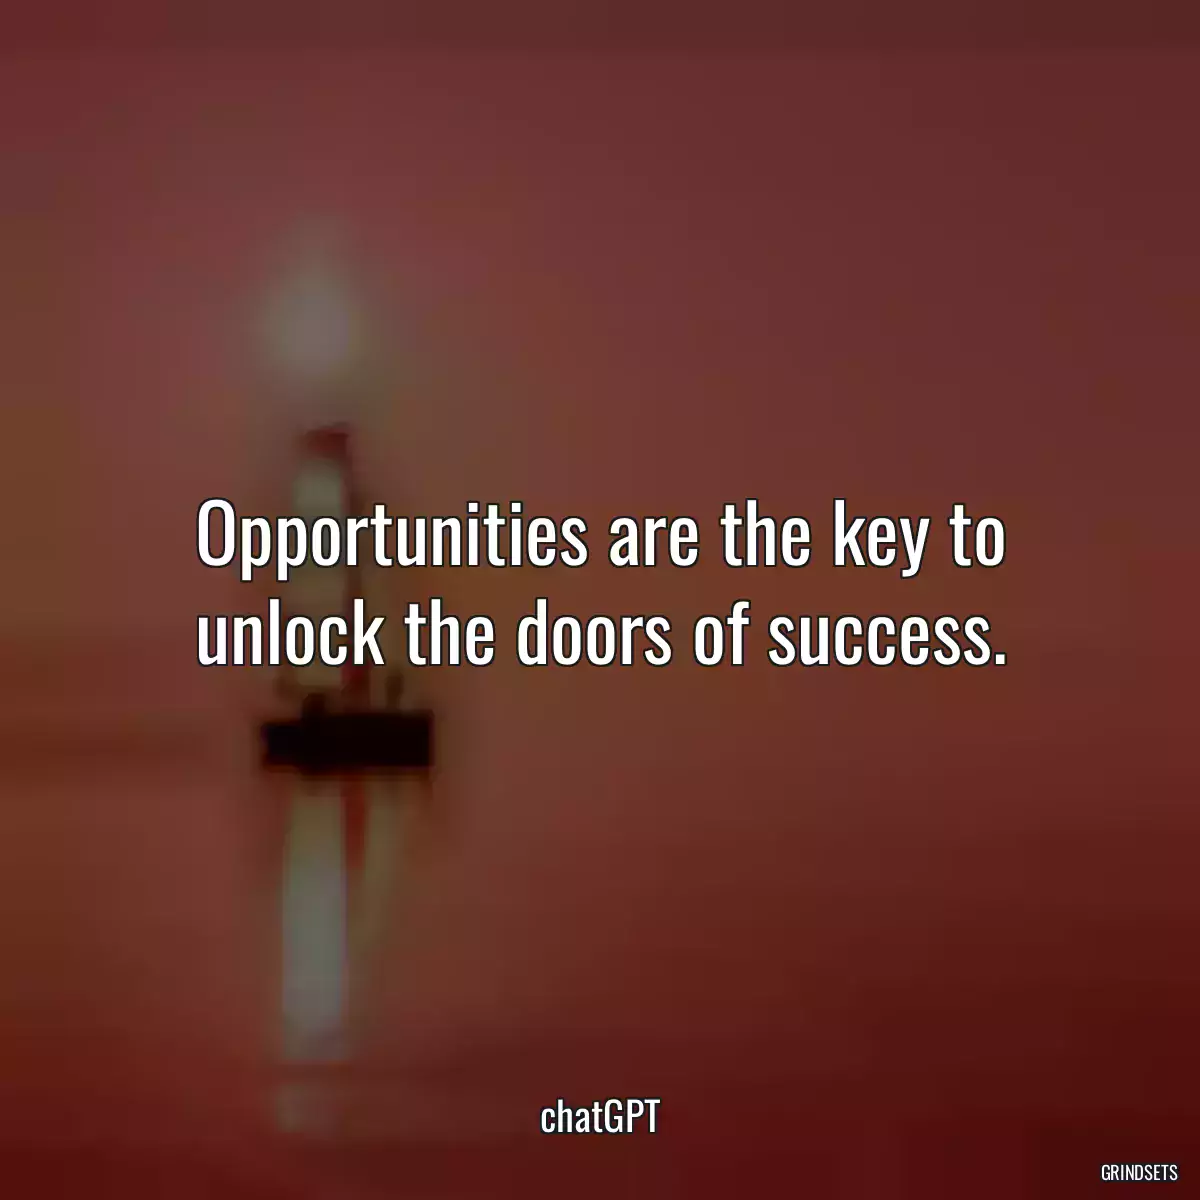 Opportunities are the key to unlock the doors of success.